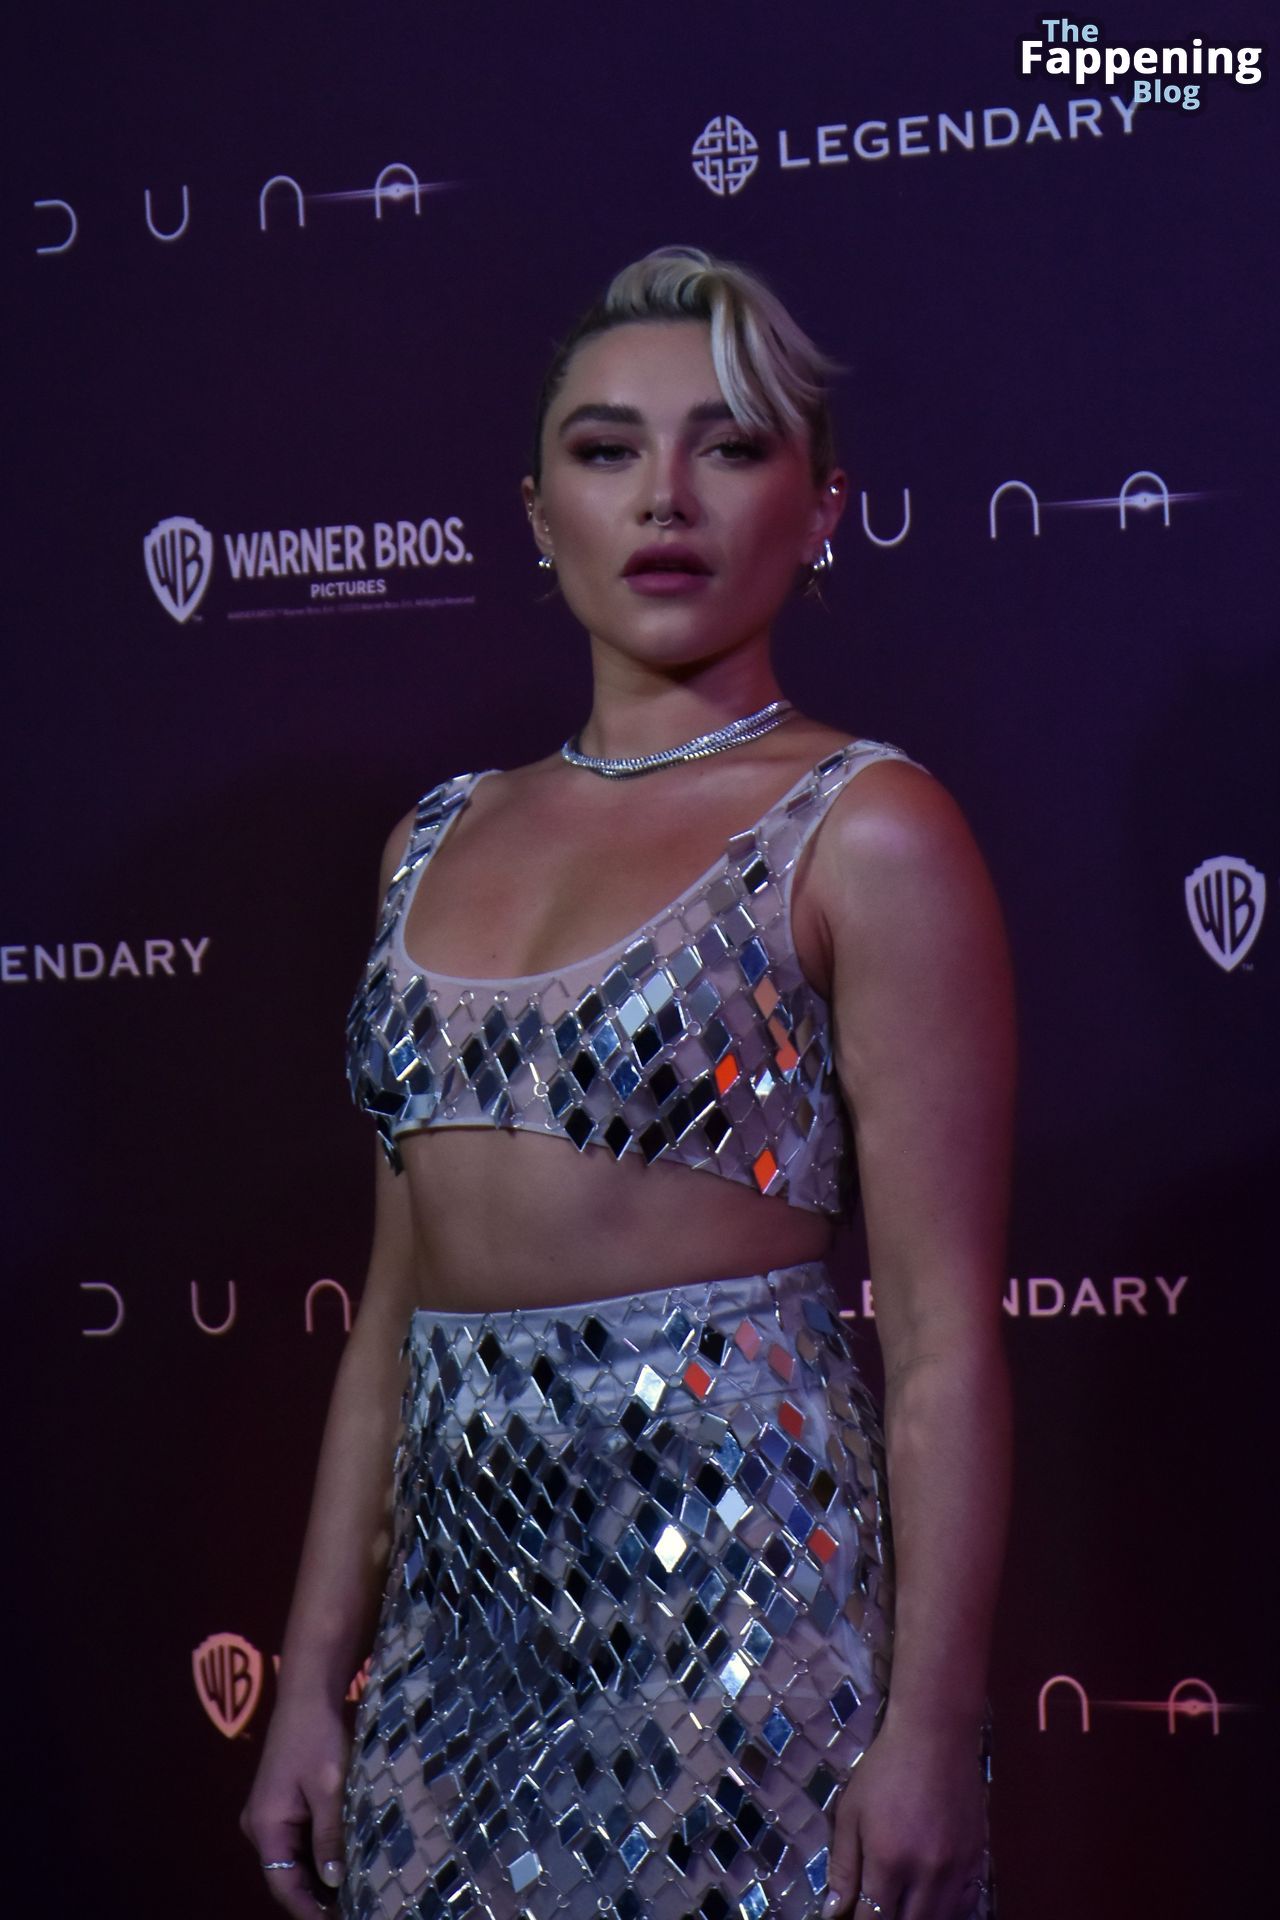 Florence-Pugh-Sexy-40-The-Fappening-Blog.jpg